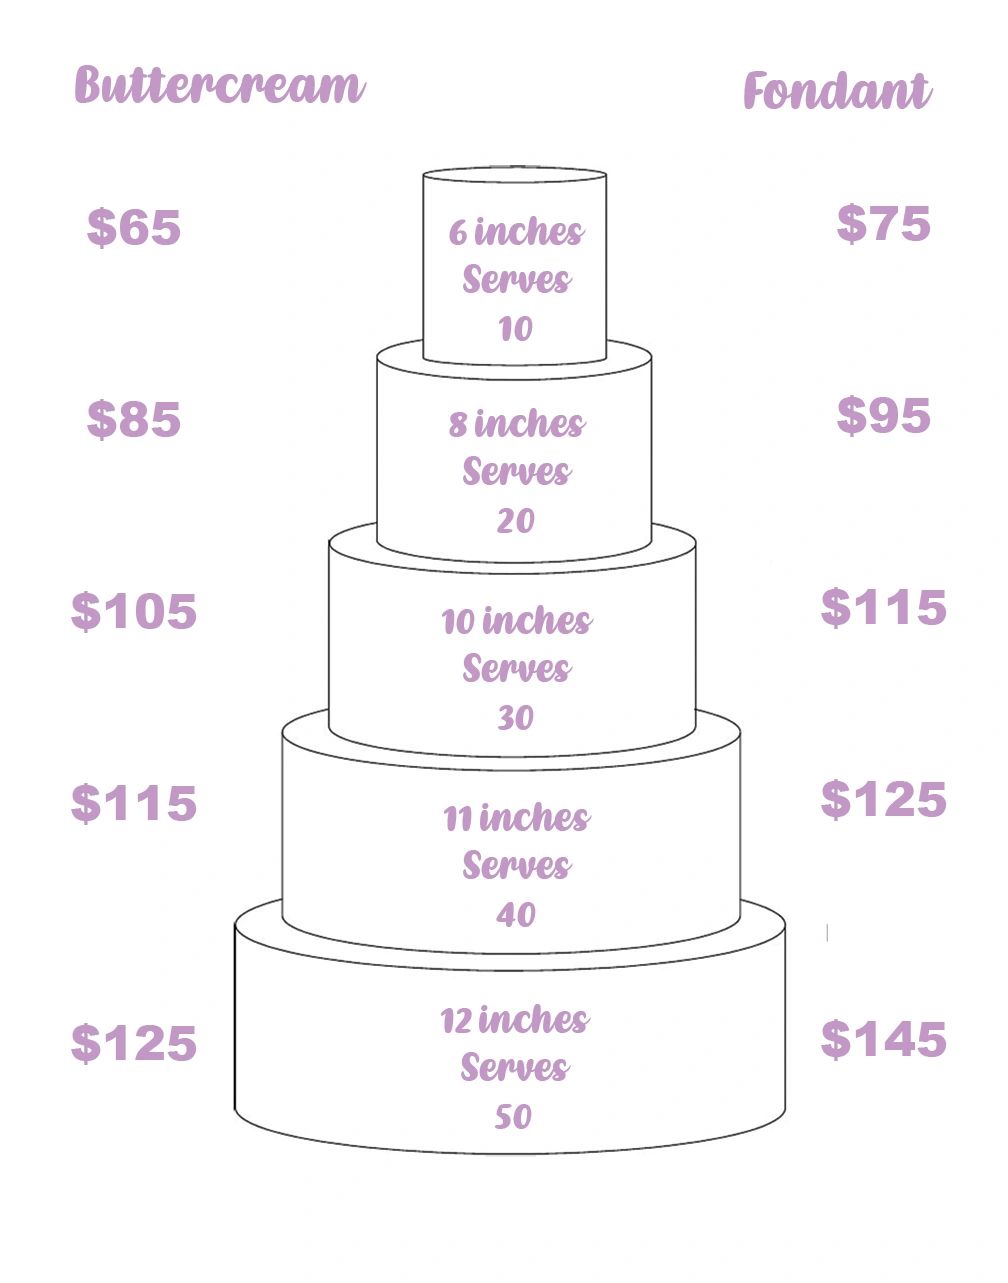 What is the best wedding cake size for 50 guests?